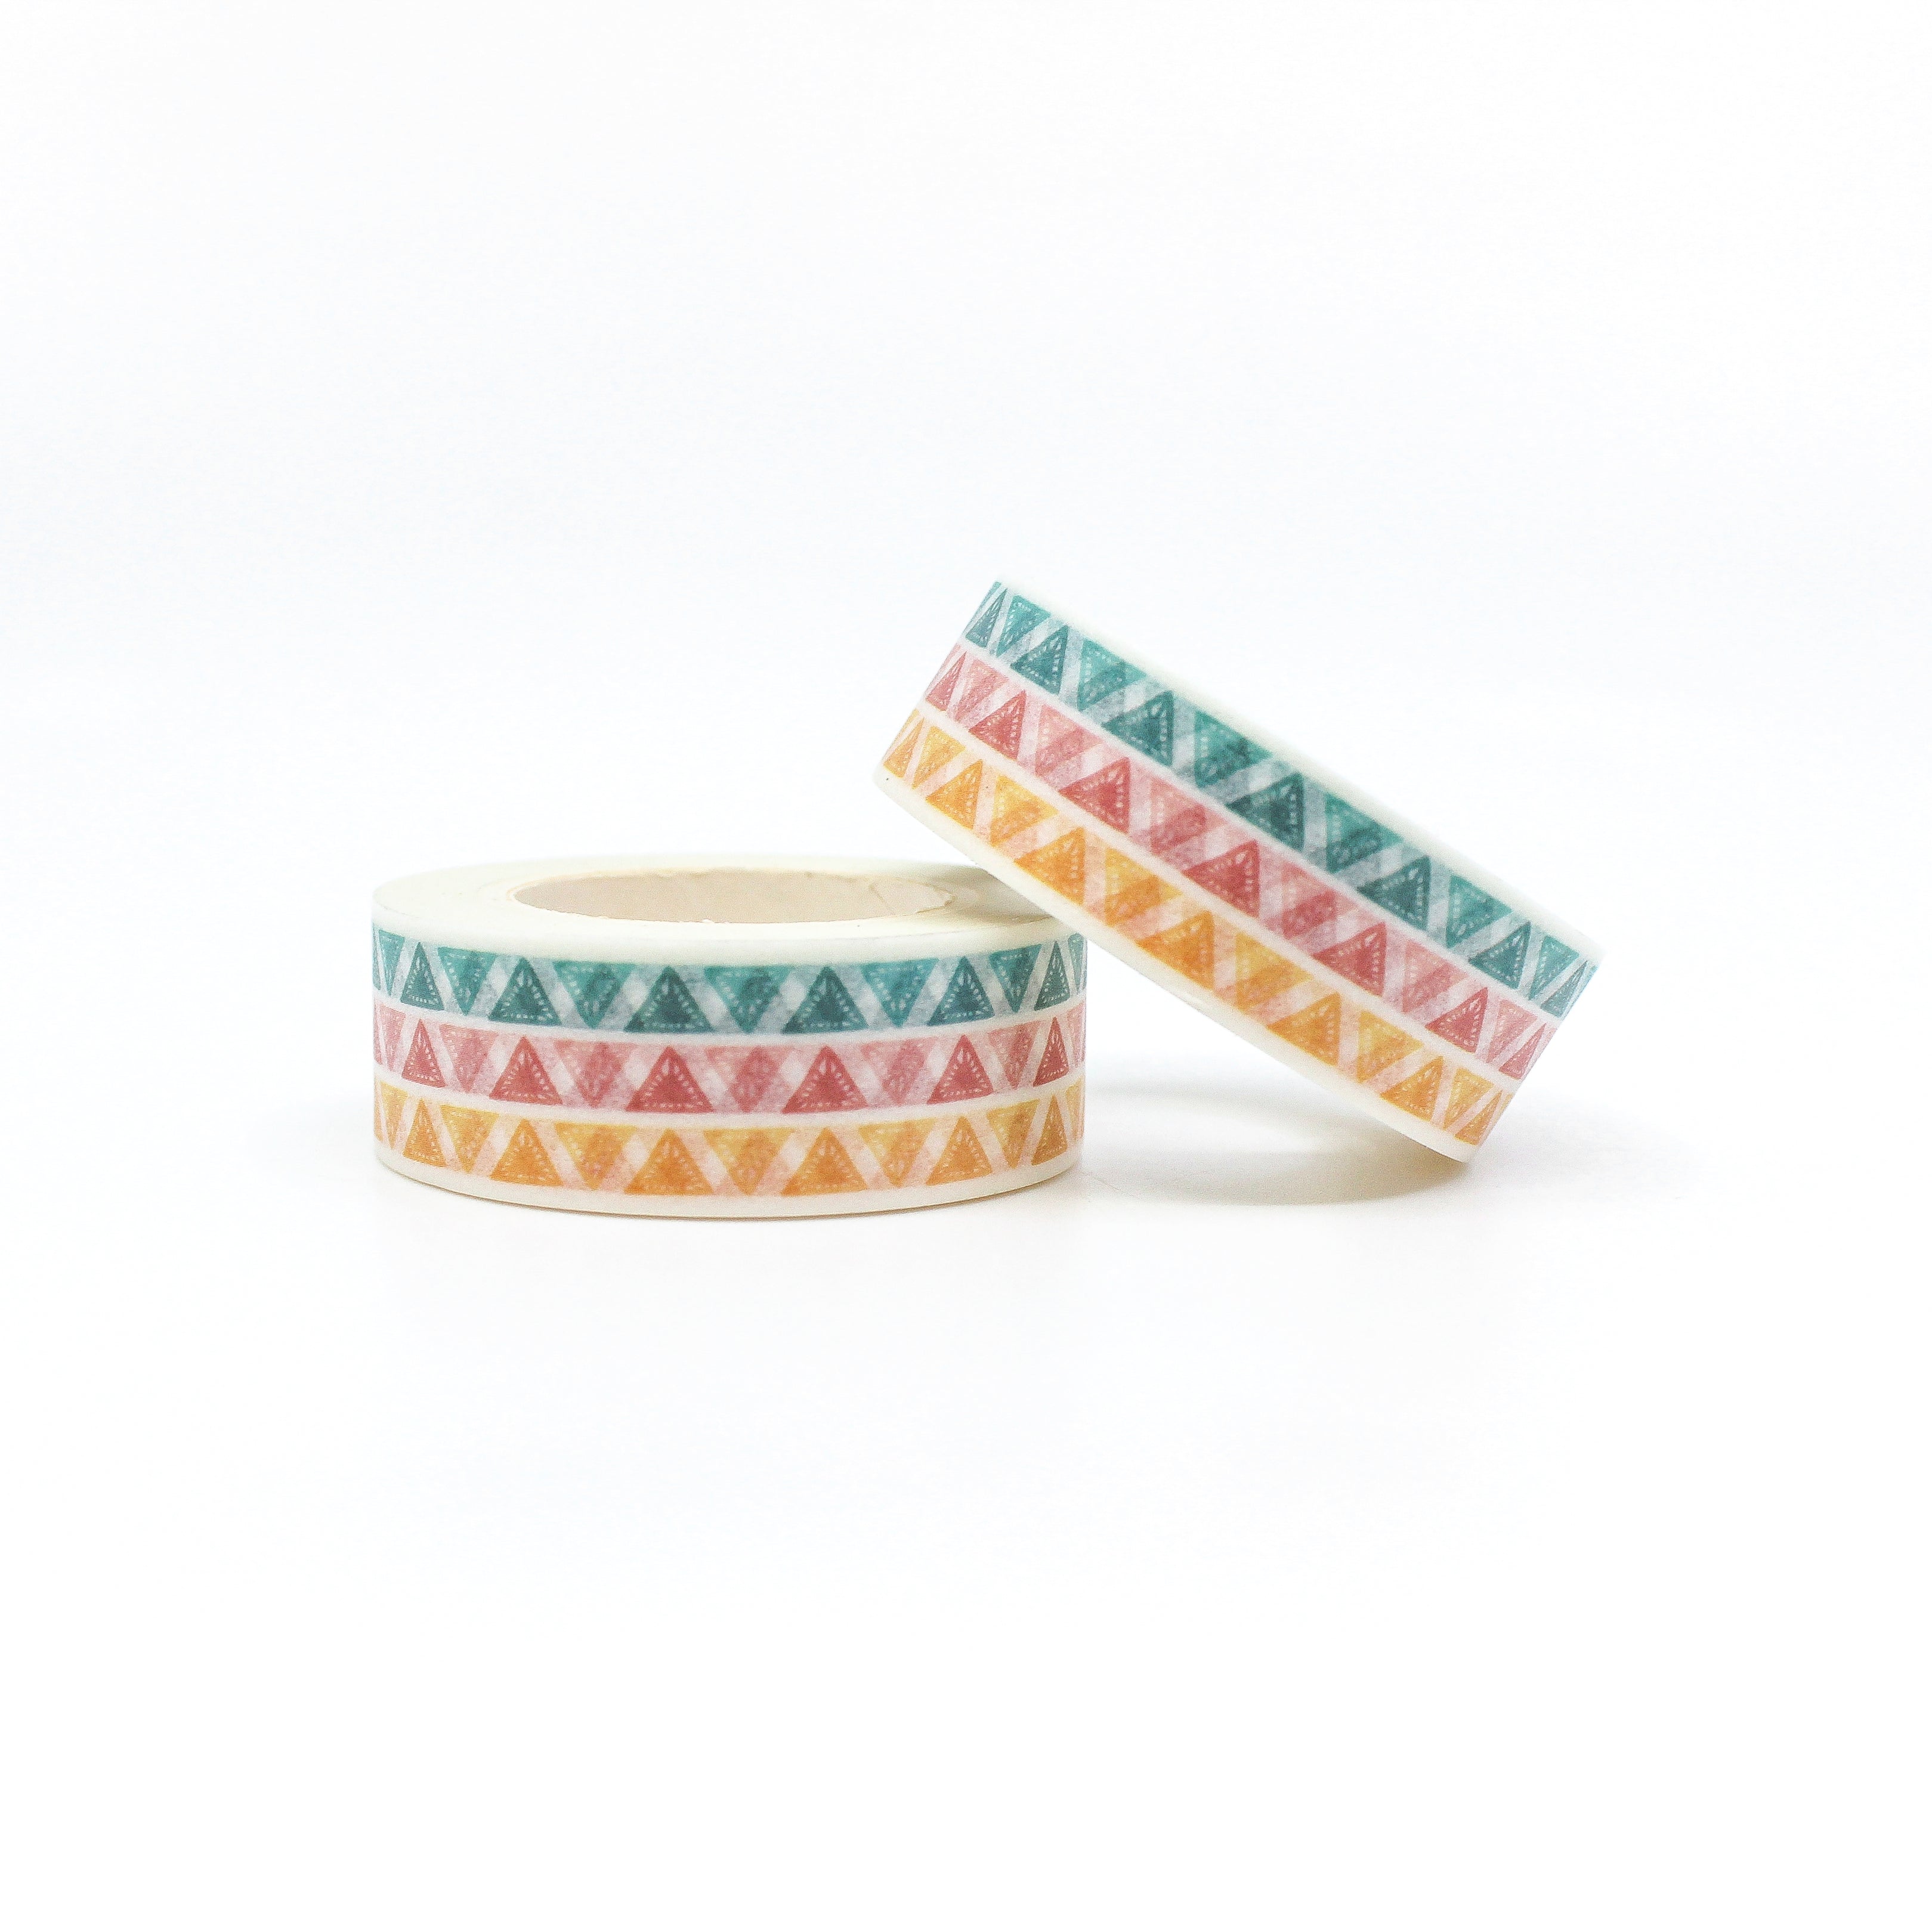 This is a cute collection of triangle washi tapes from BBB Supplies Craft Shop